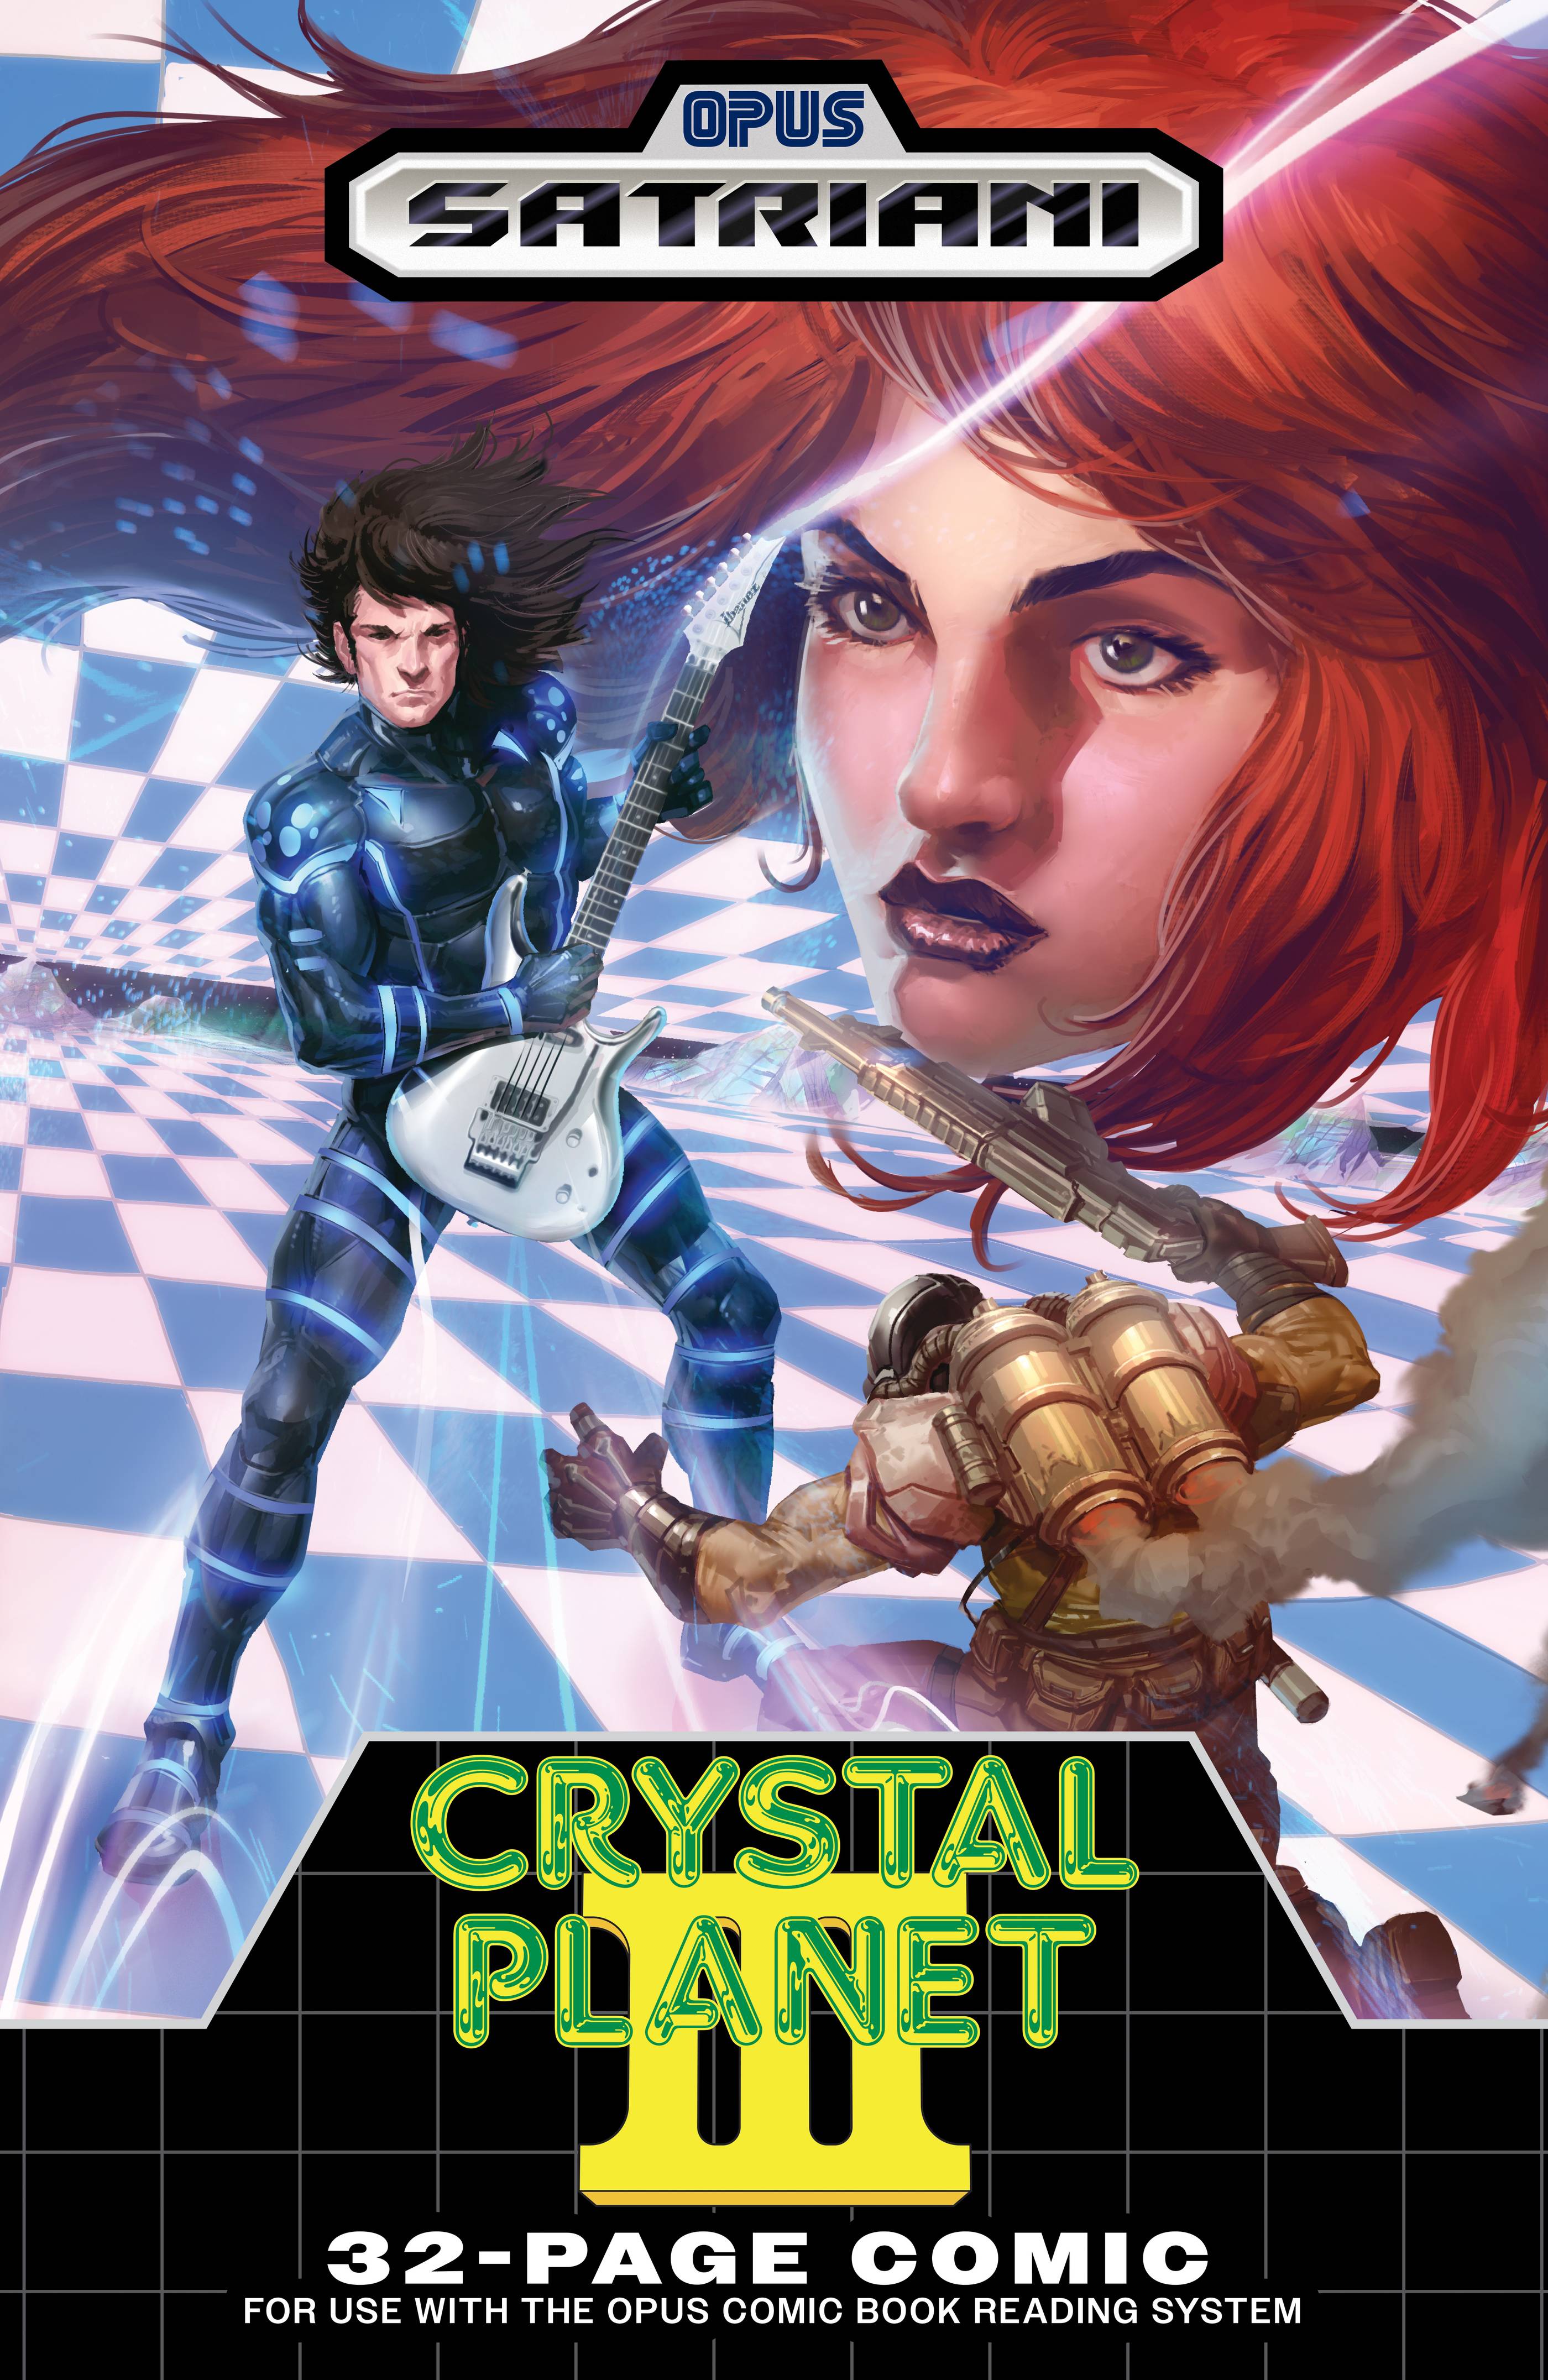 Crystal Planet #3 Cover B 1 for 5 Incentive Video Game Homage (Of 5)